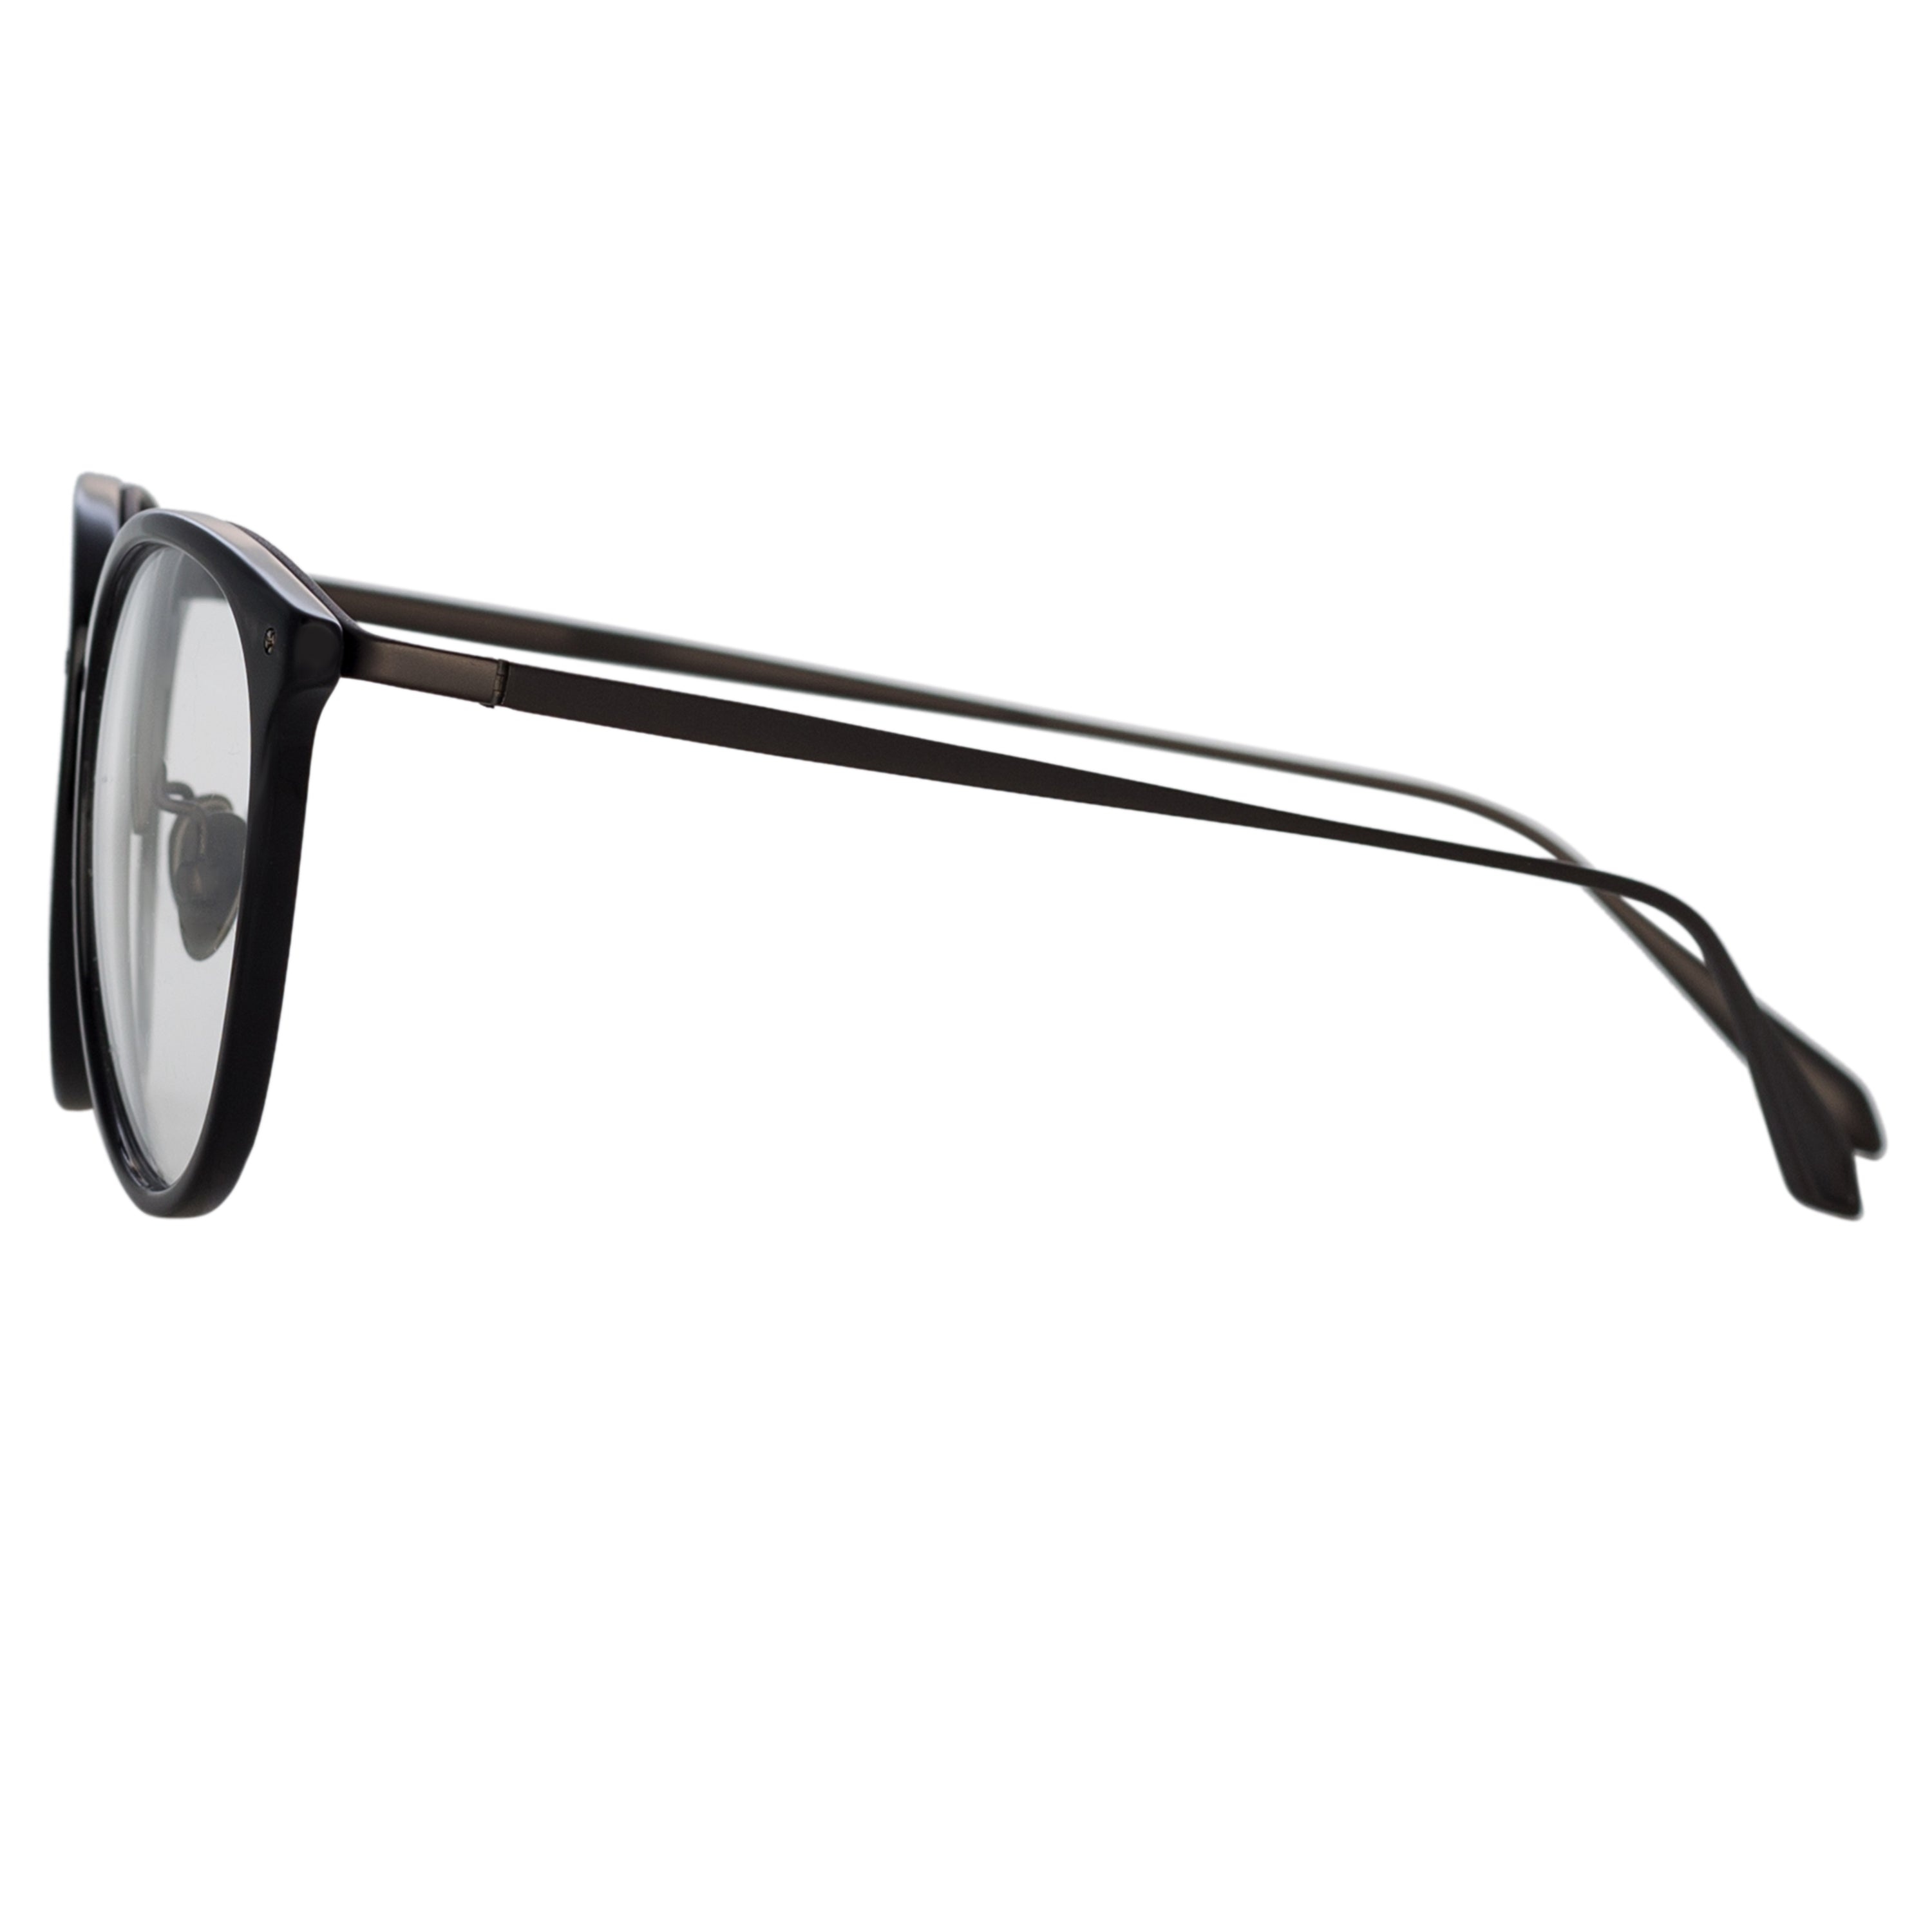 CALTHORPE OVAL OPTICAL FRAME IN BLACK AND NICKEL - 3